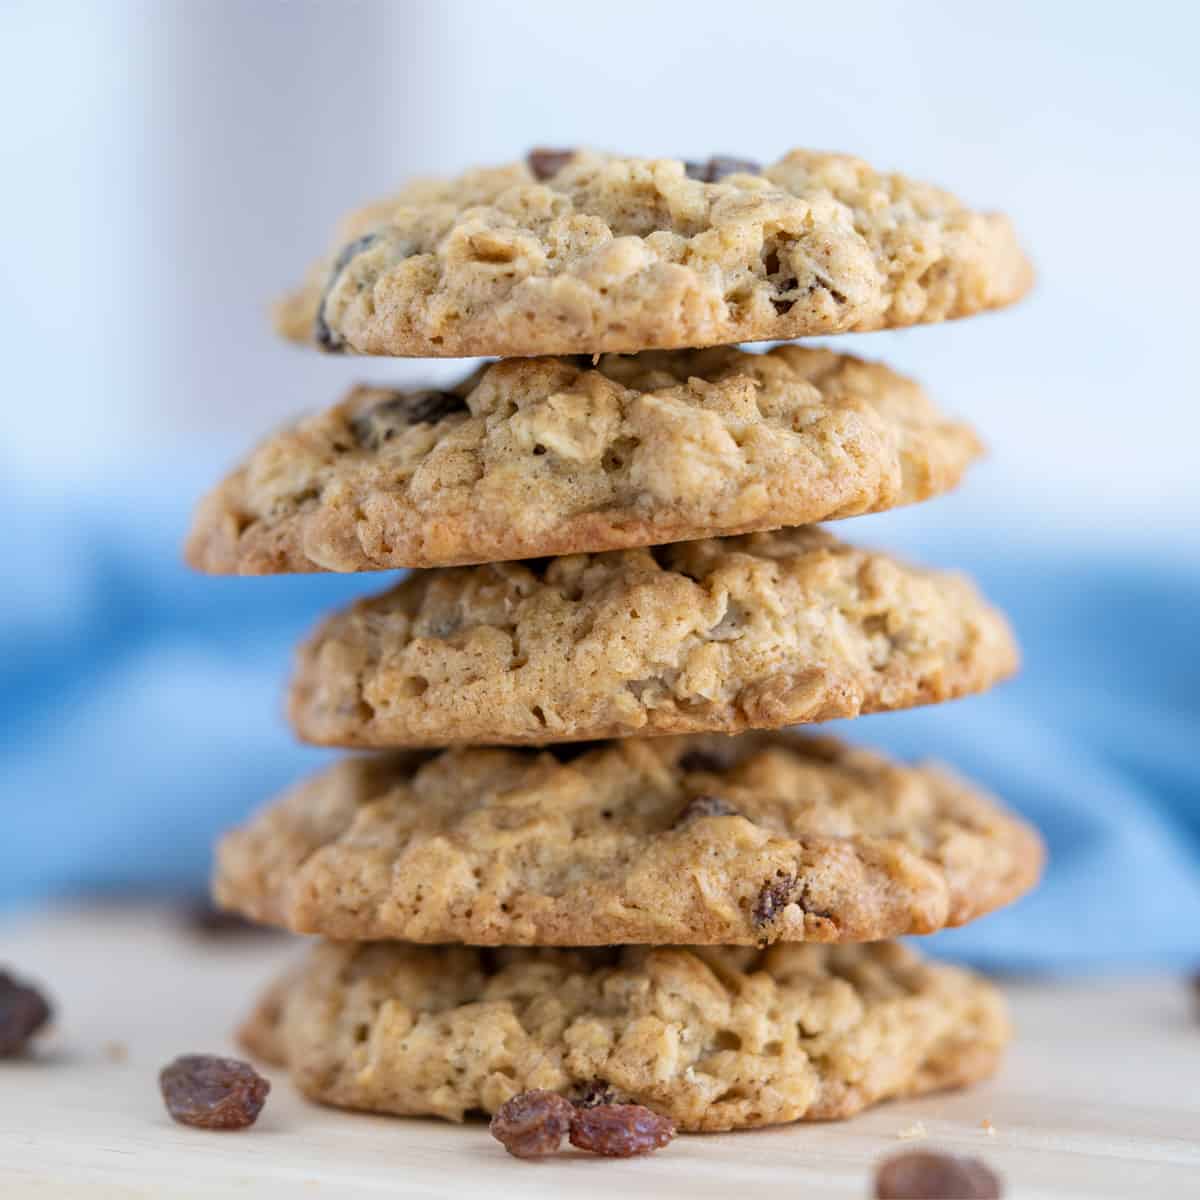 Stack of Oatmeal cookies with a blue and white napkin behind the stack.